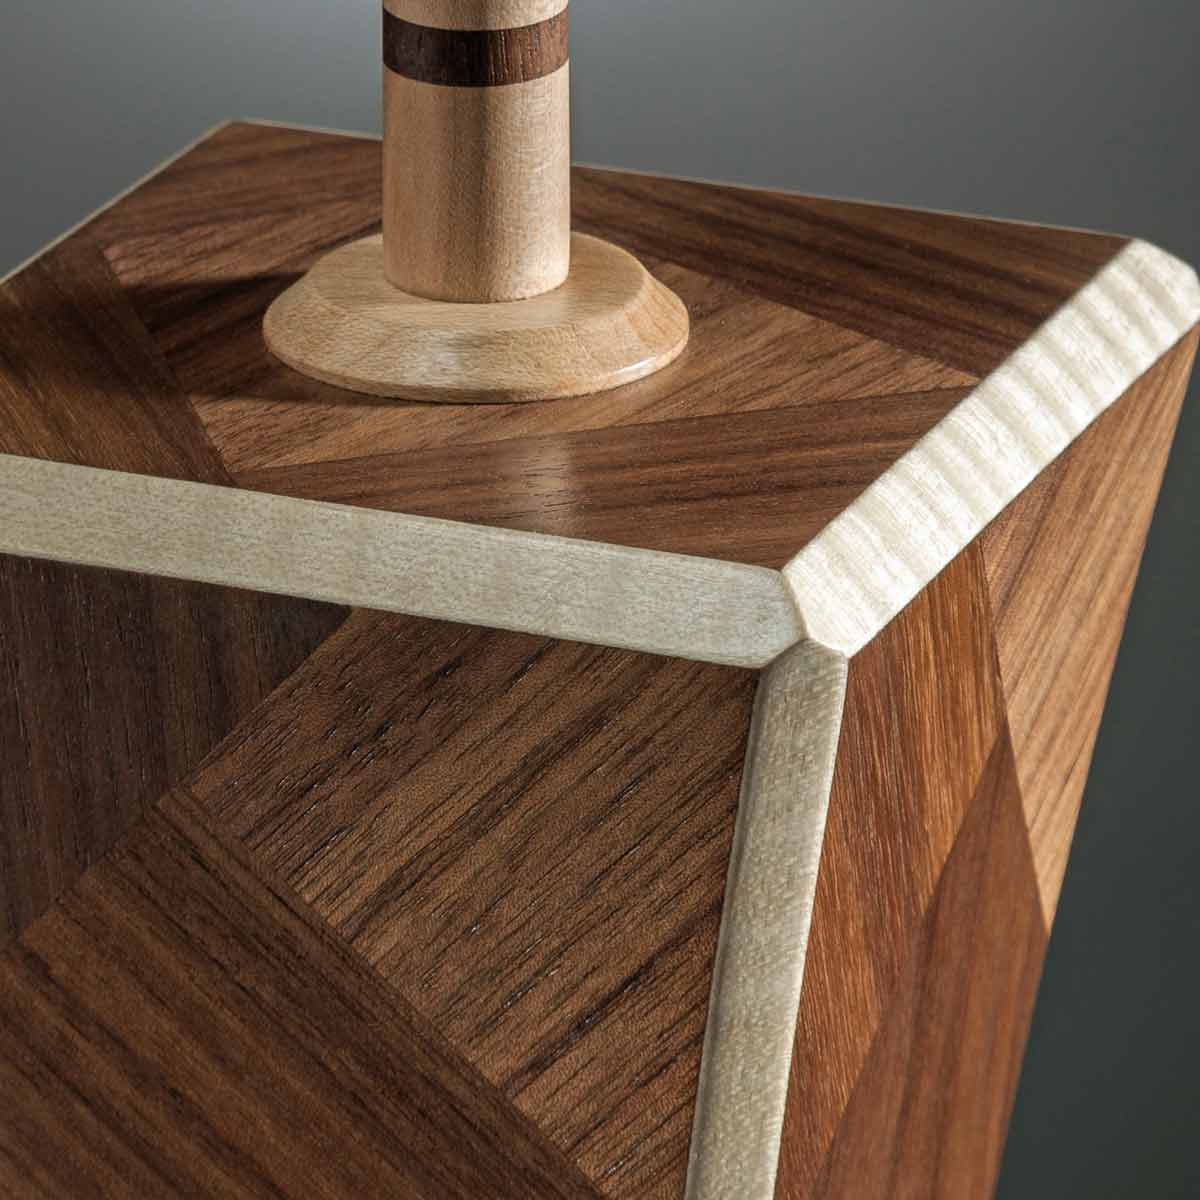 Walnut wood finish on Artisan Abstract table lamp contemporary